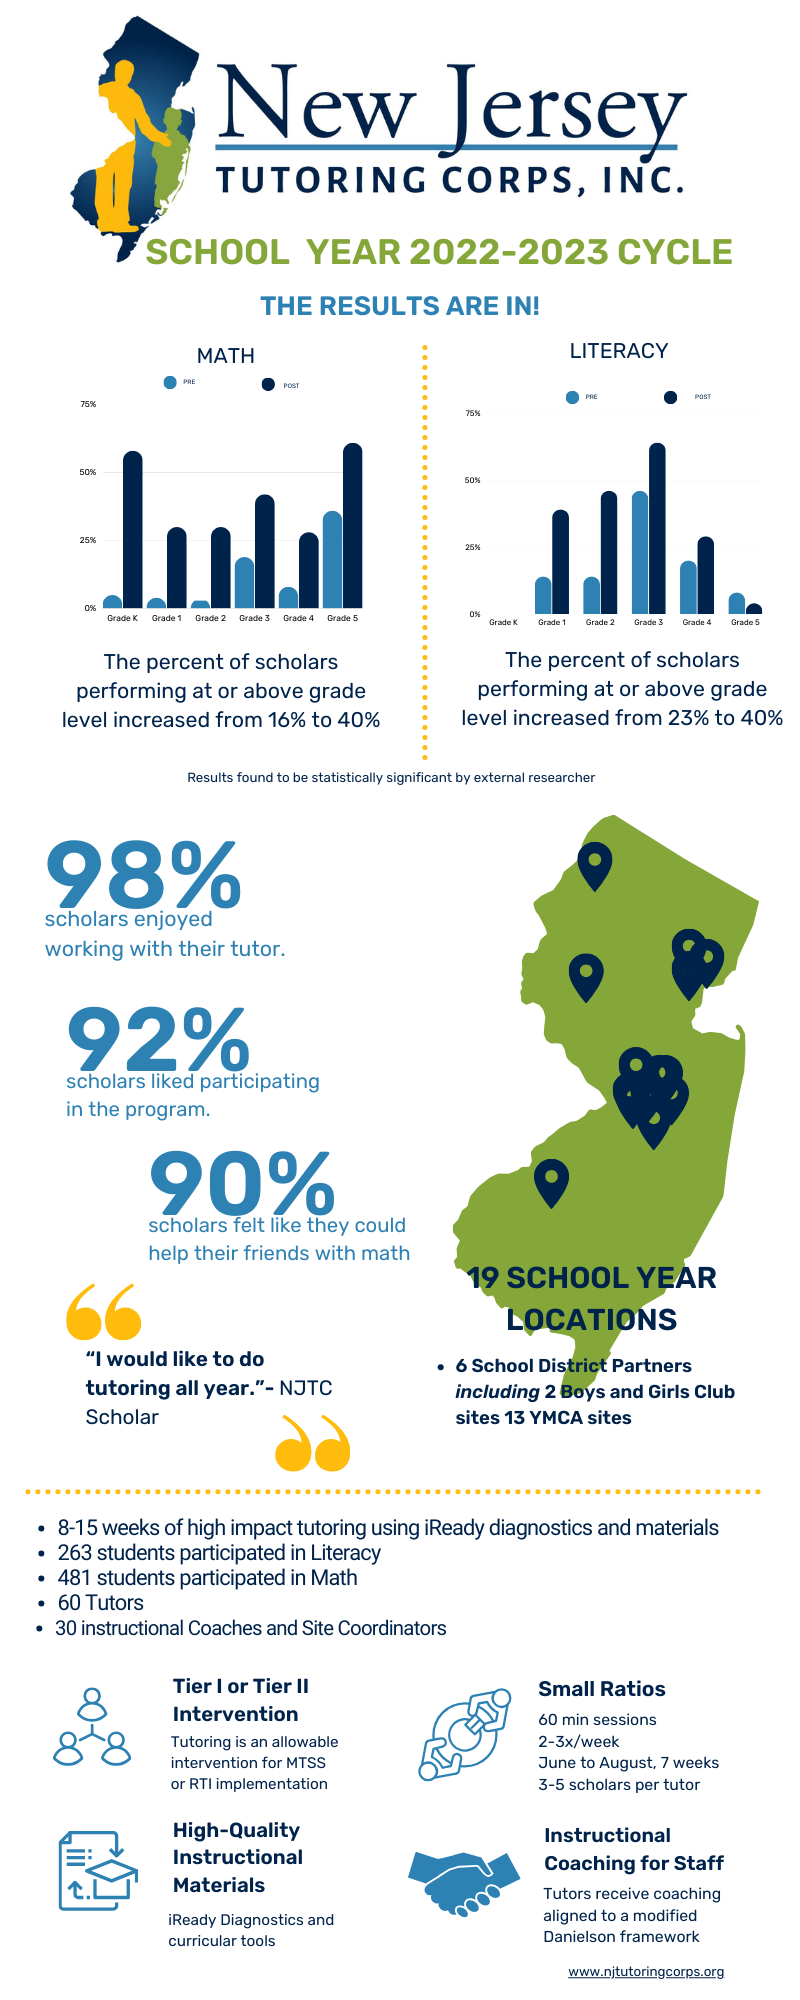 New Jersey Tutoring Corps 2022 to 2023 Cycle The Results Are In